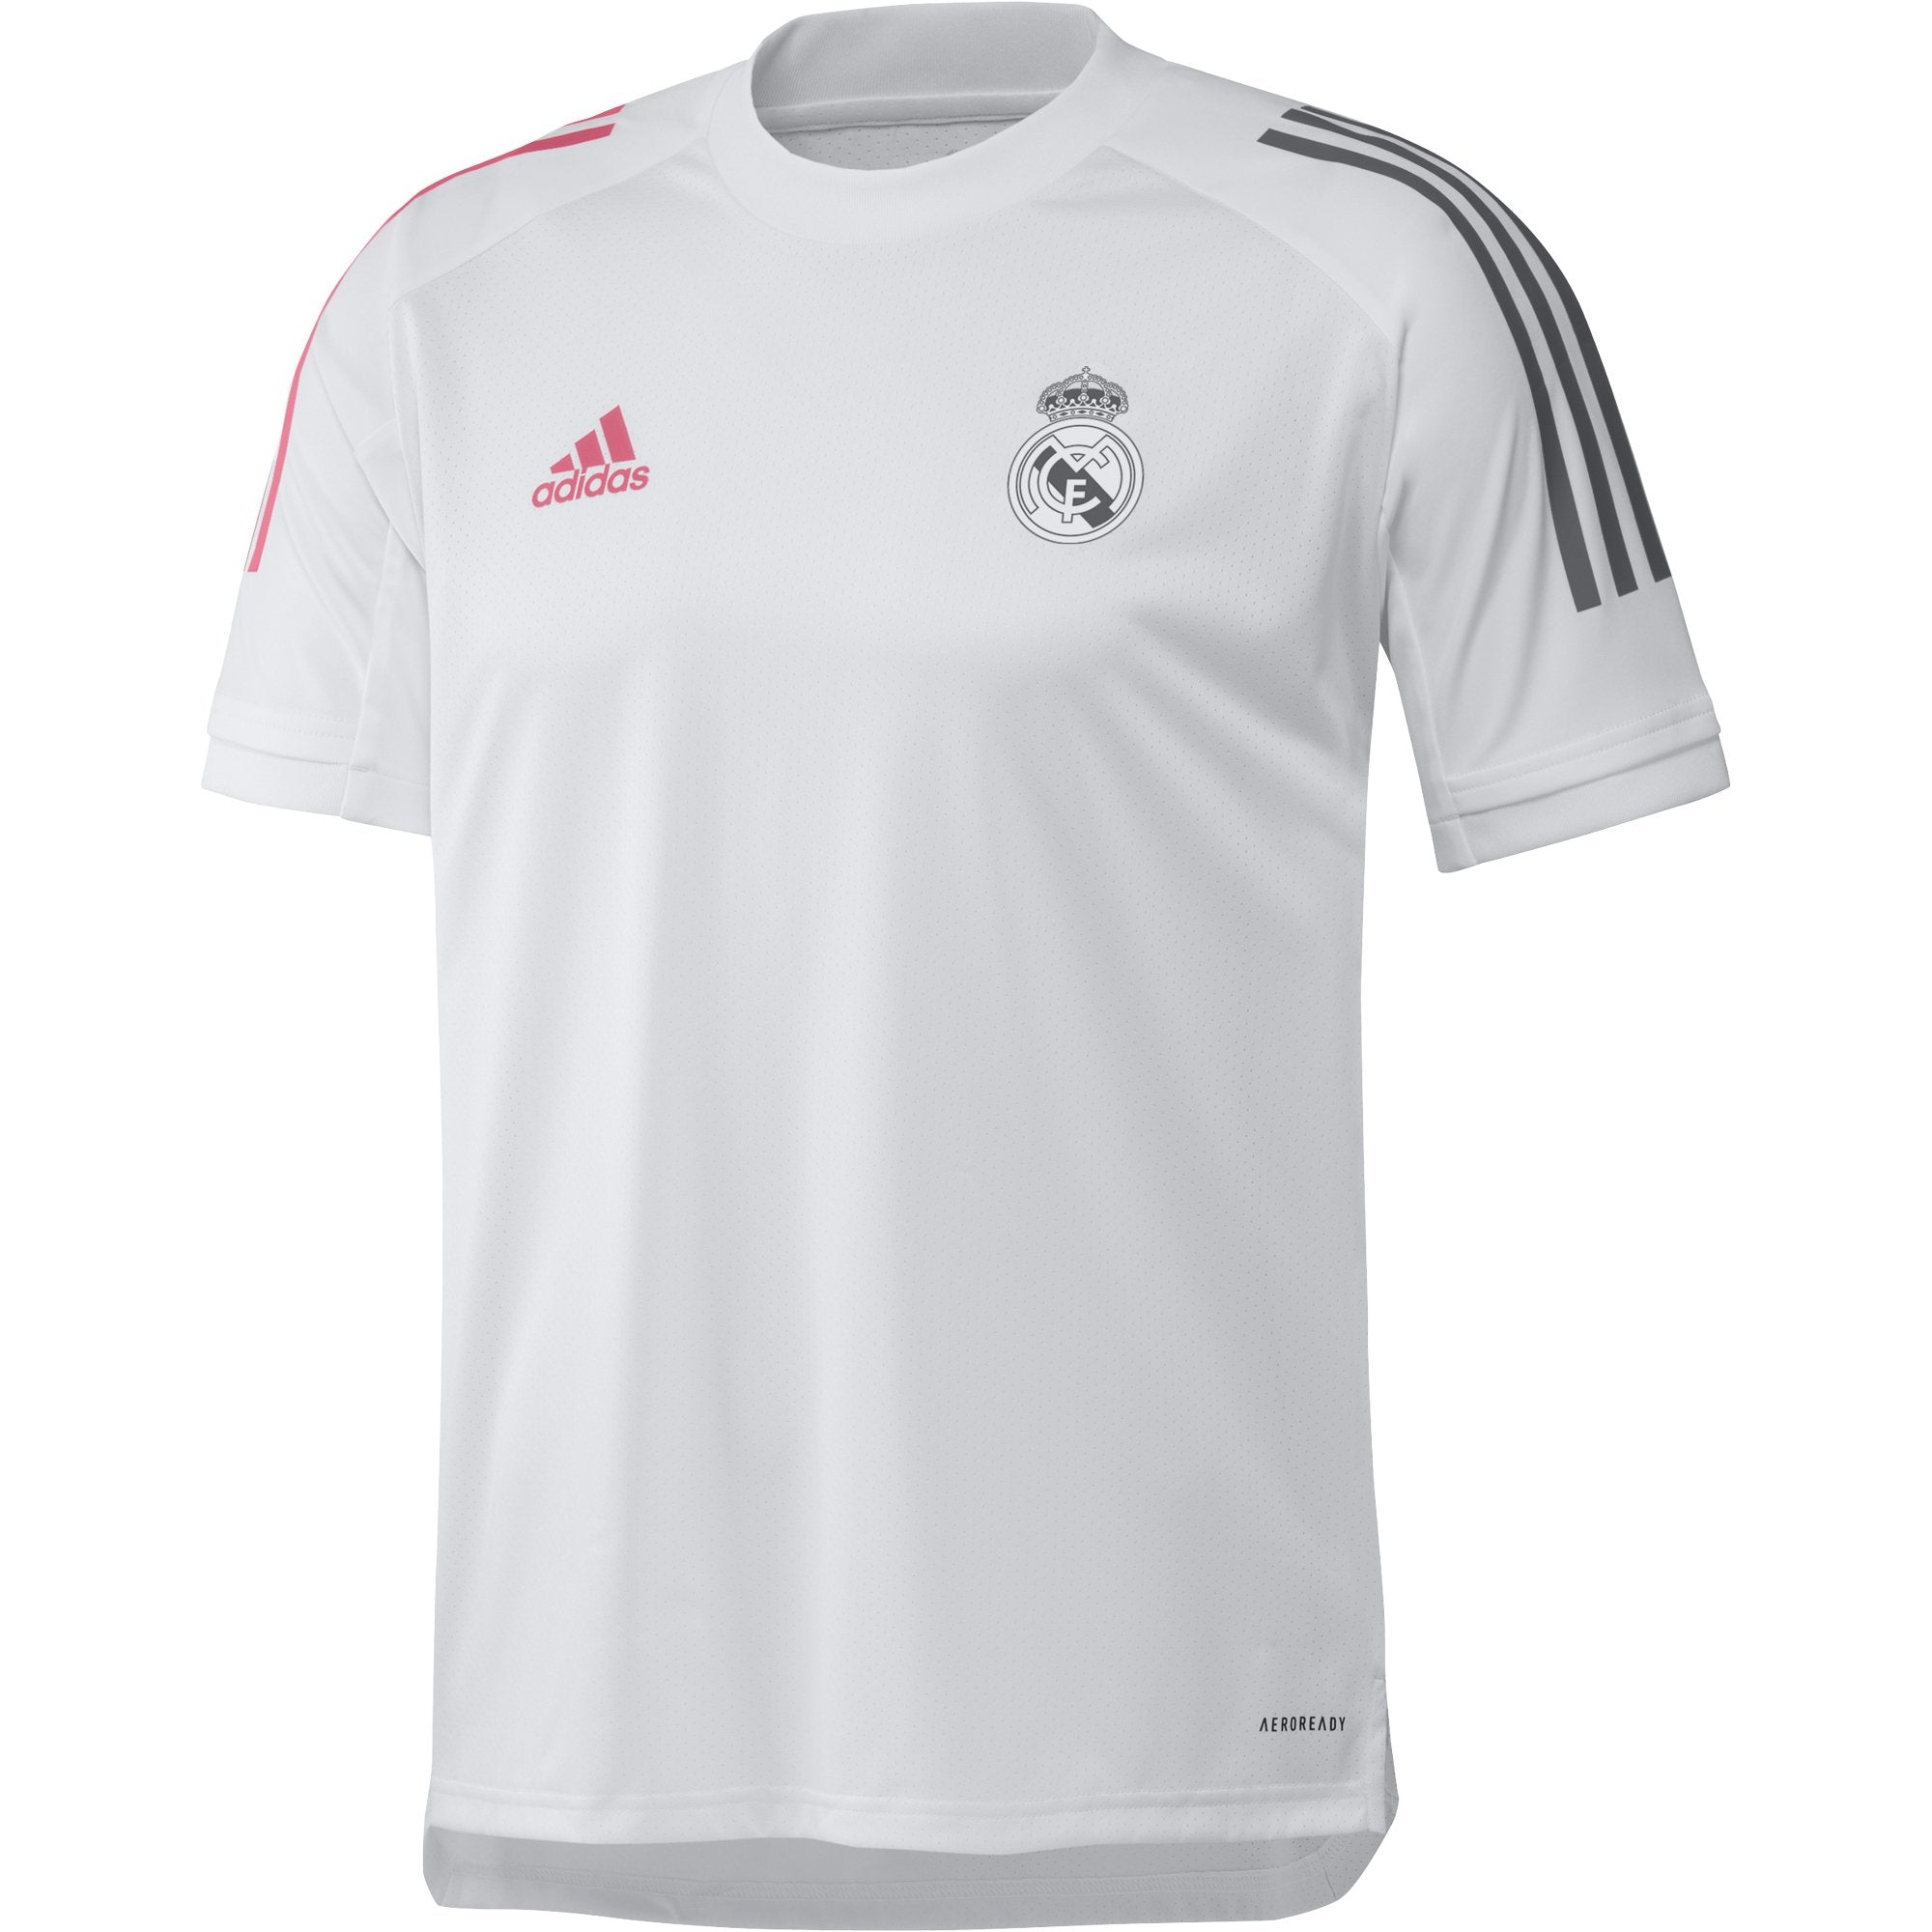 real madrid black and white jersey